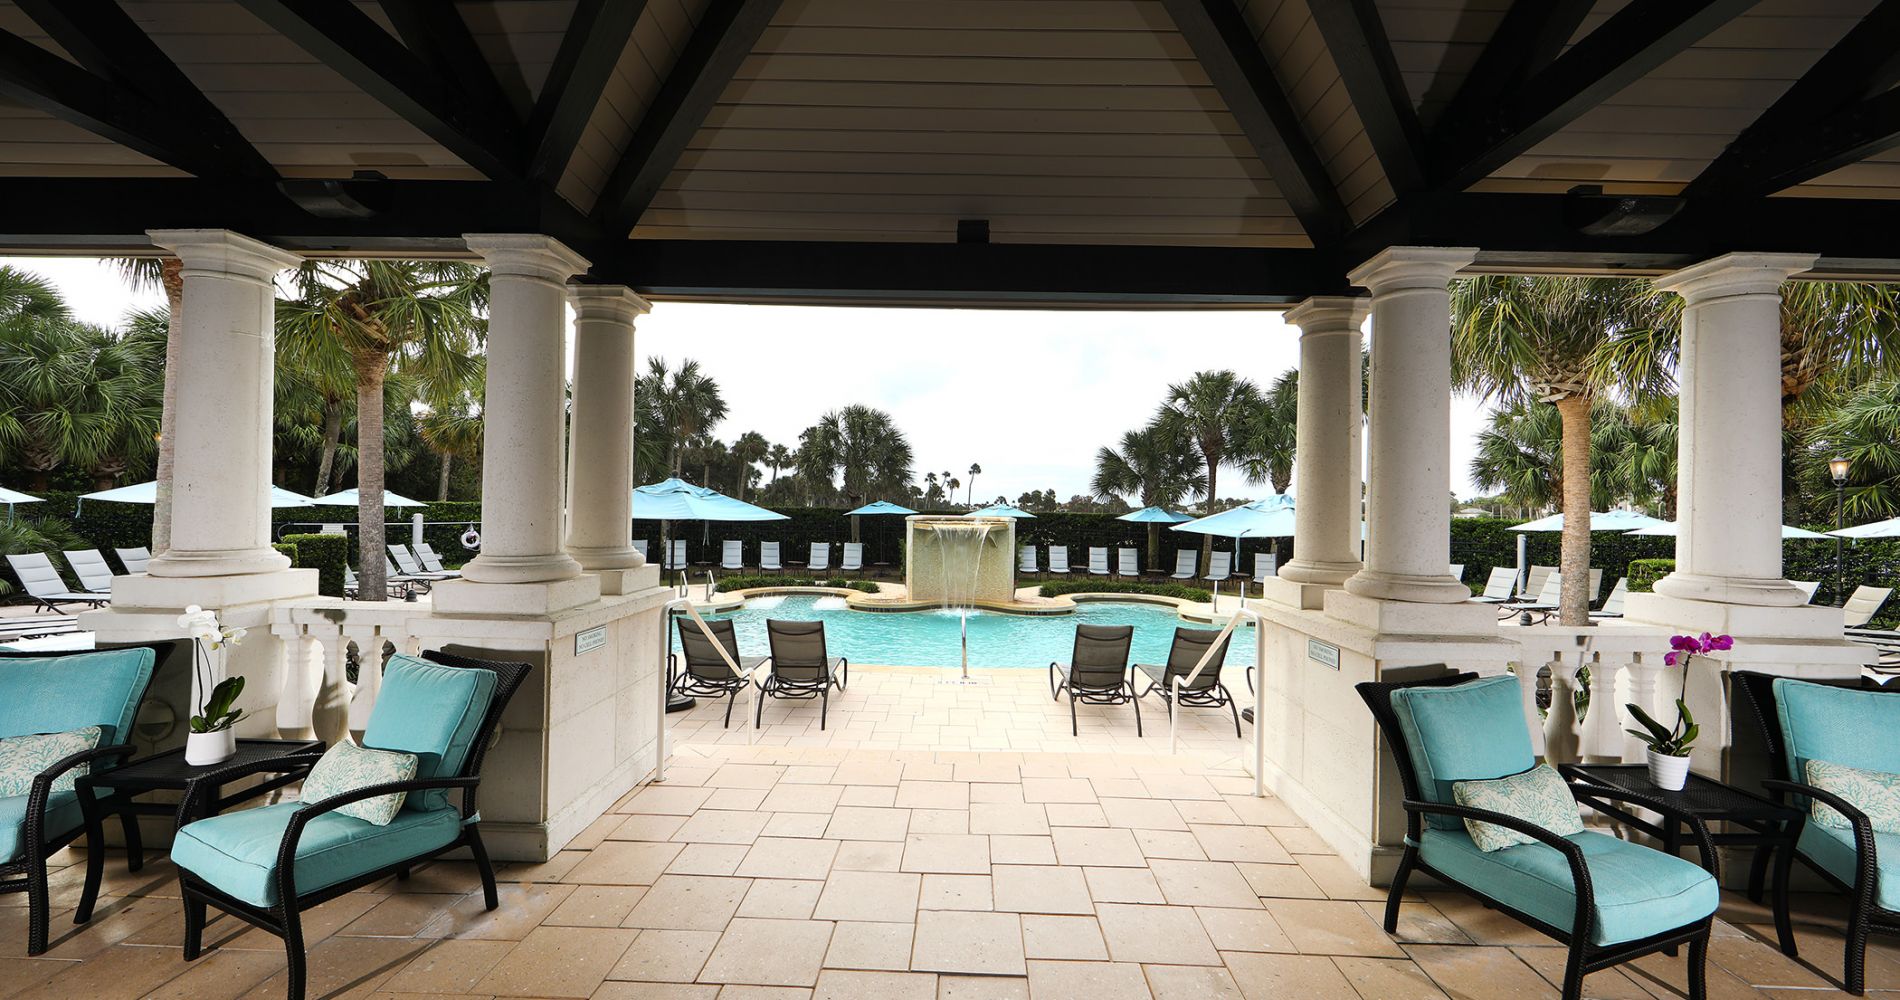 Covered area of the outdoor pool deck at the Inn Spa